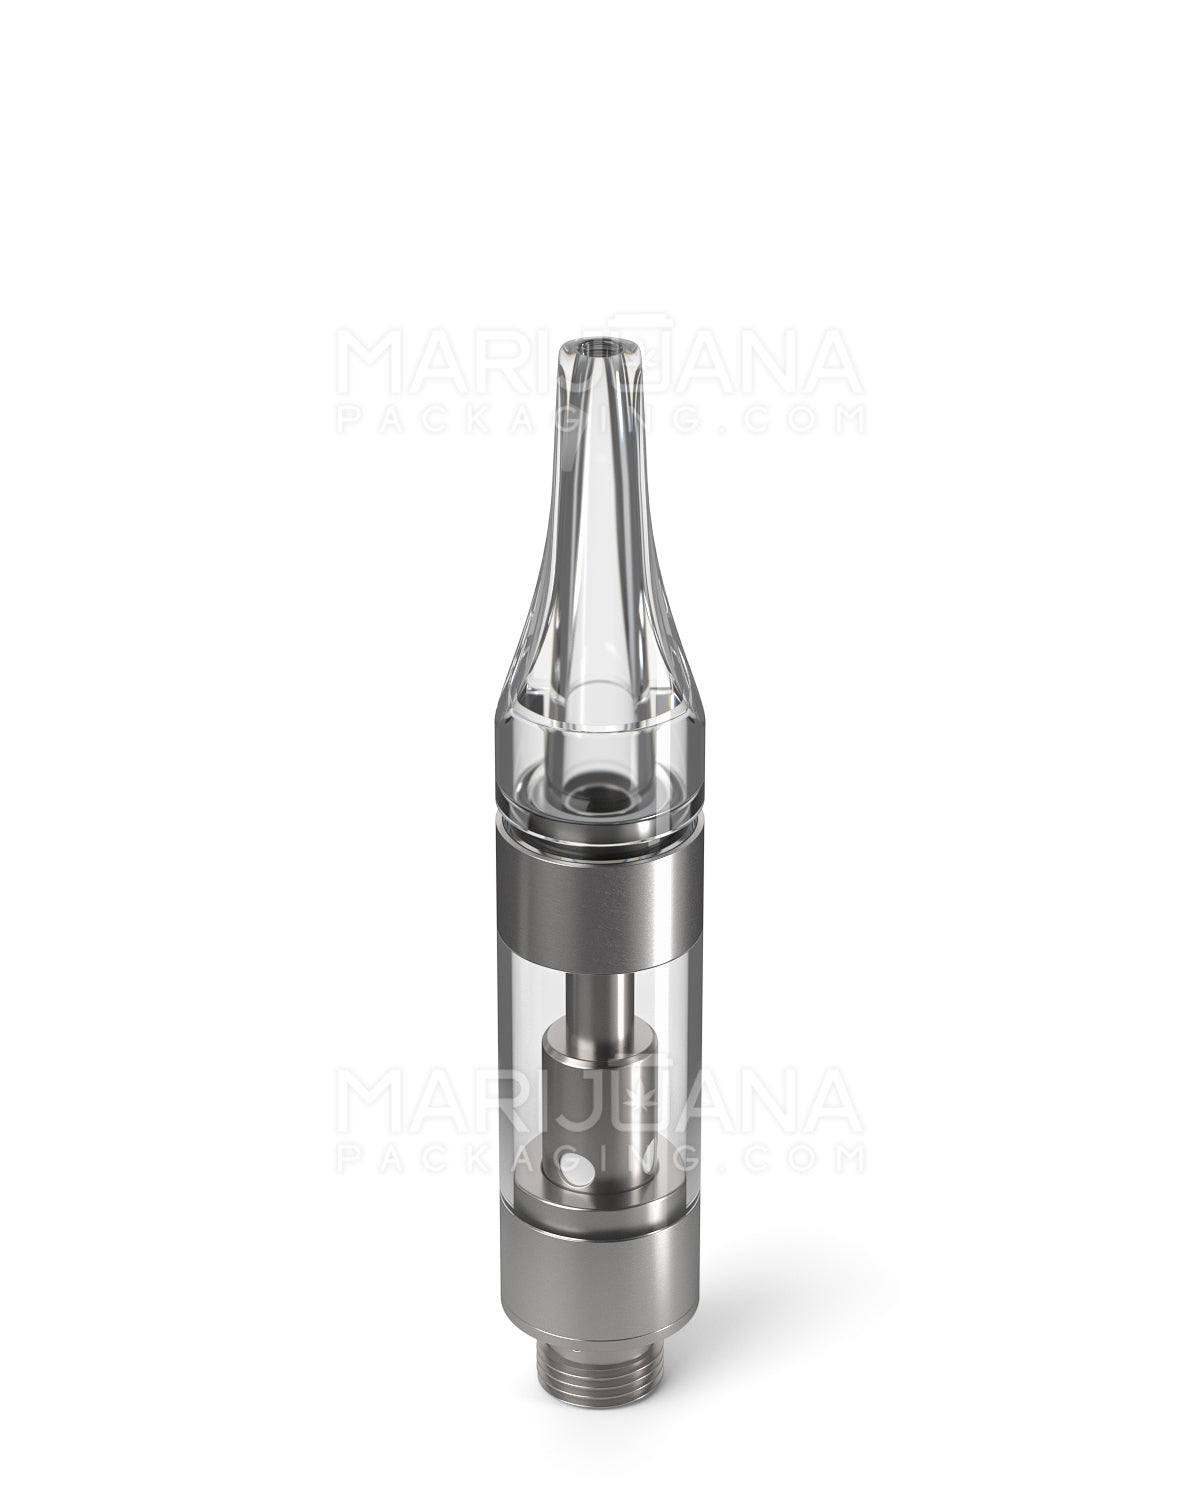 CCELL | Liquid6 Reactor Plastic Vape Cartridge with Clear Plastic Mouthpiece | 0.5mL - Press On - 100 Count - 4